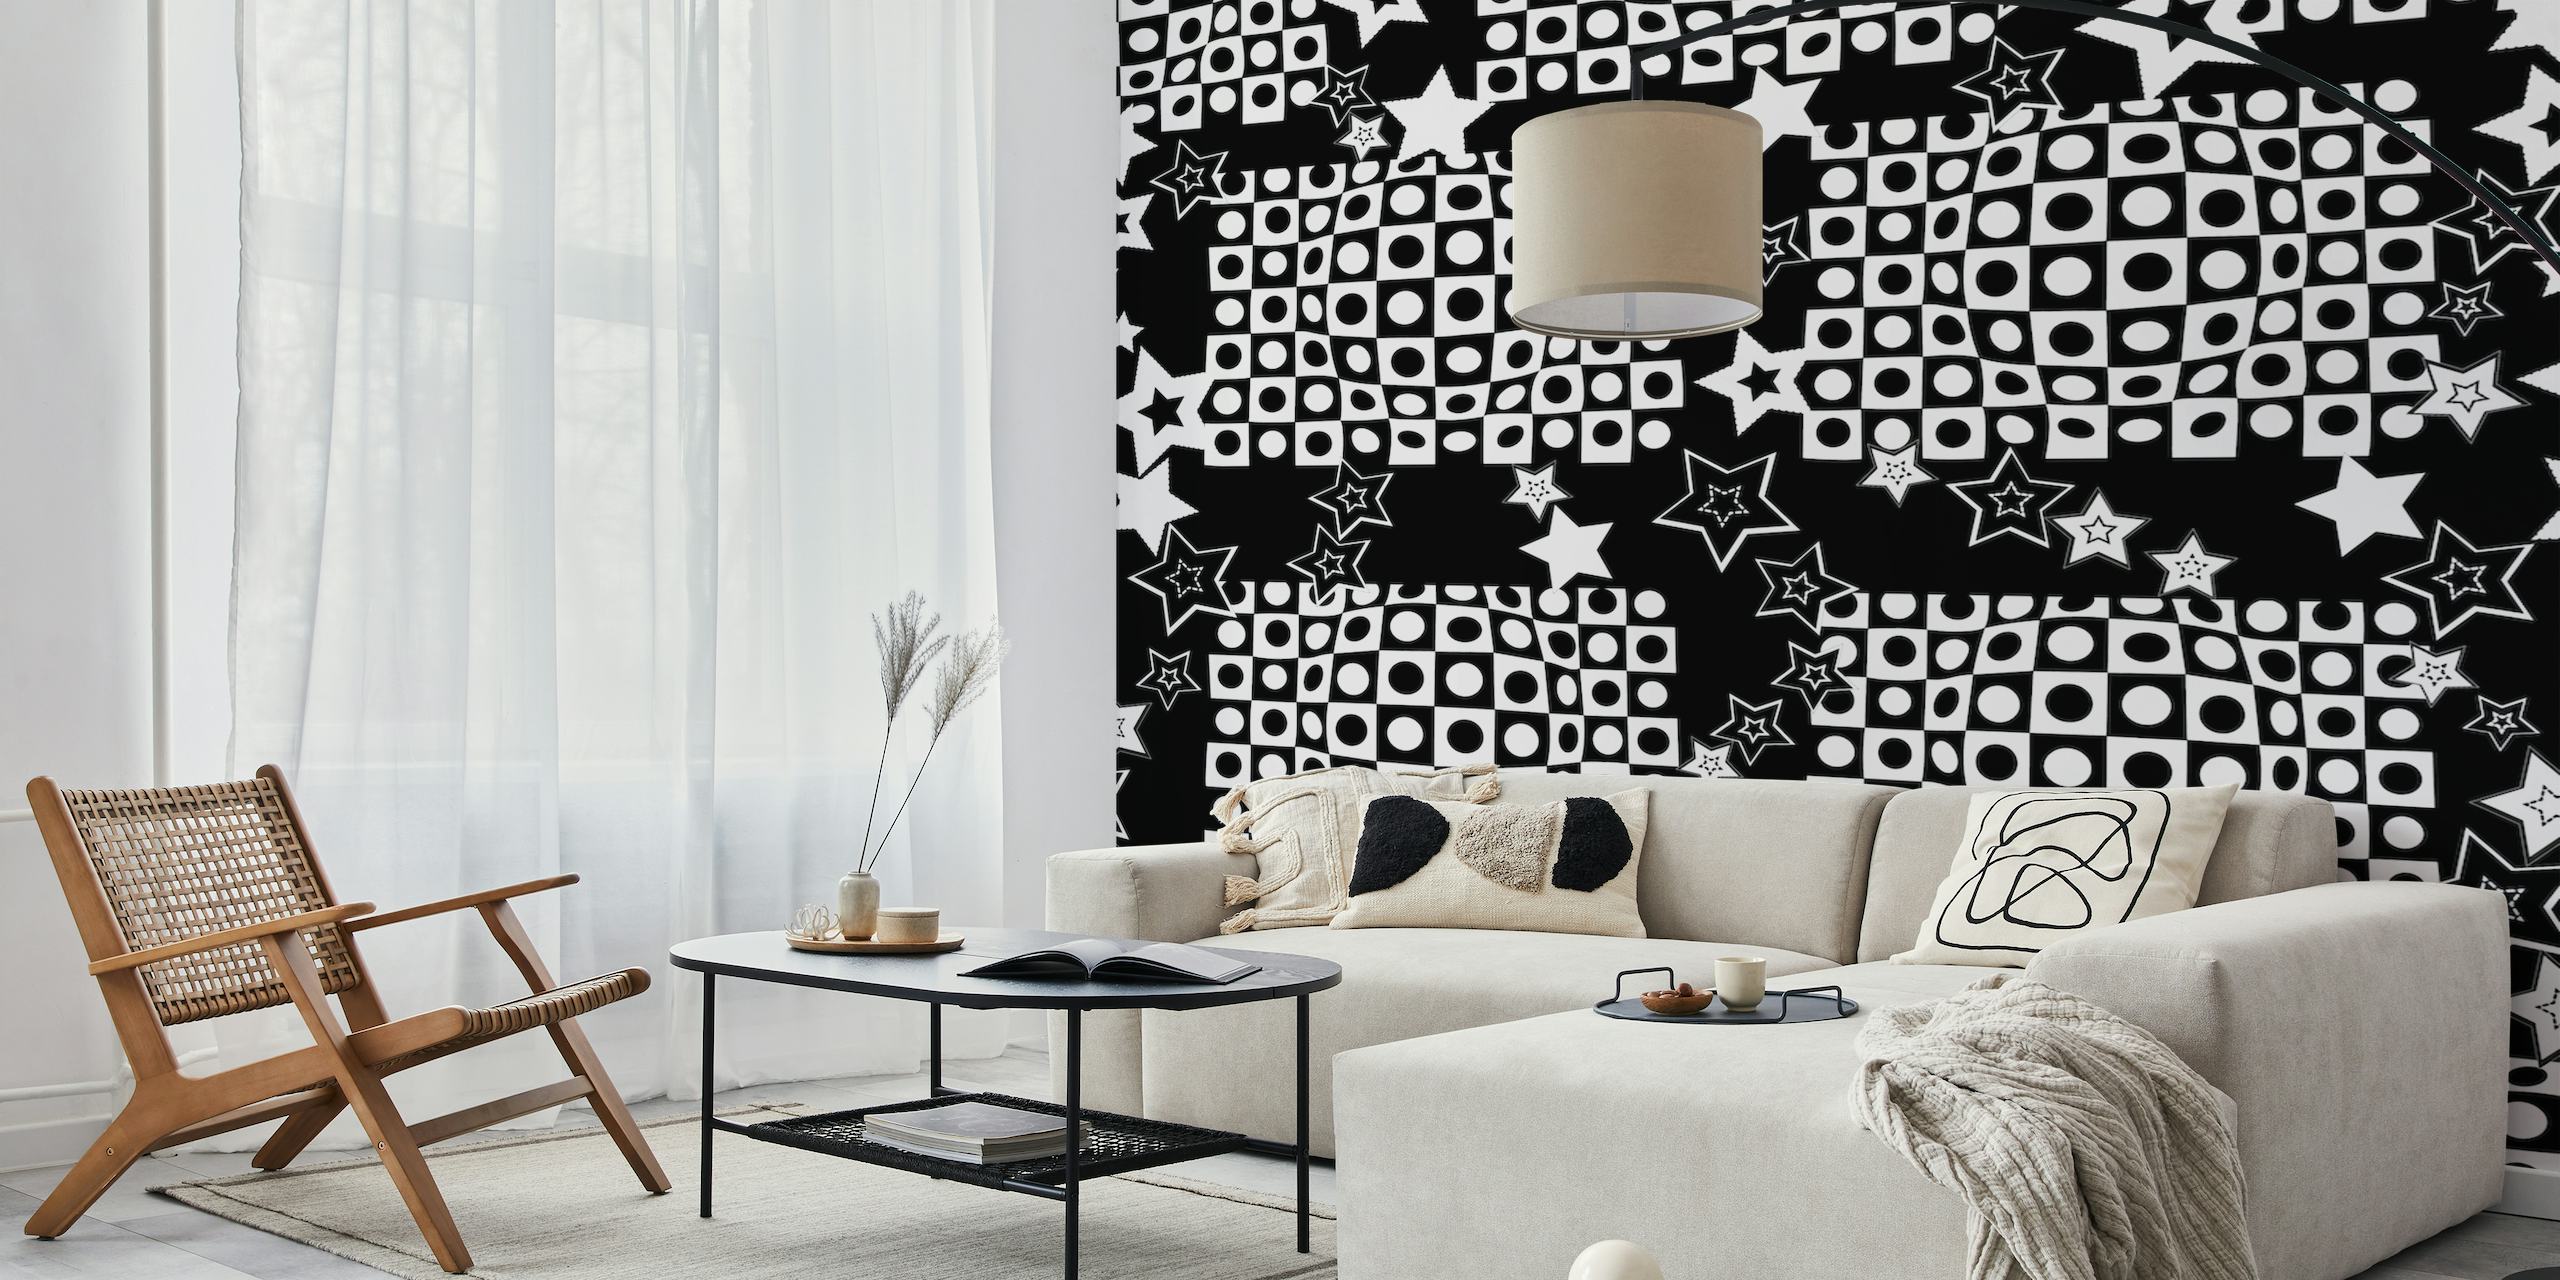 Black and white optical illusion wall mural with stars for modern room decor